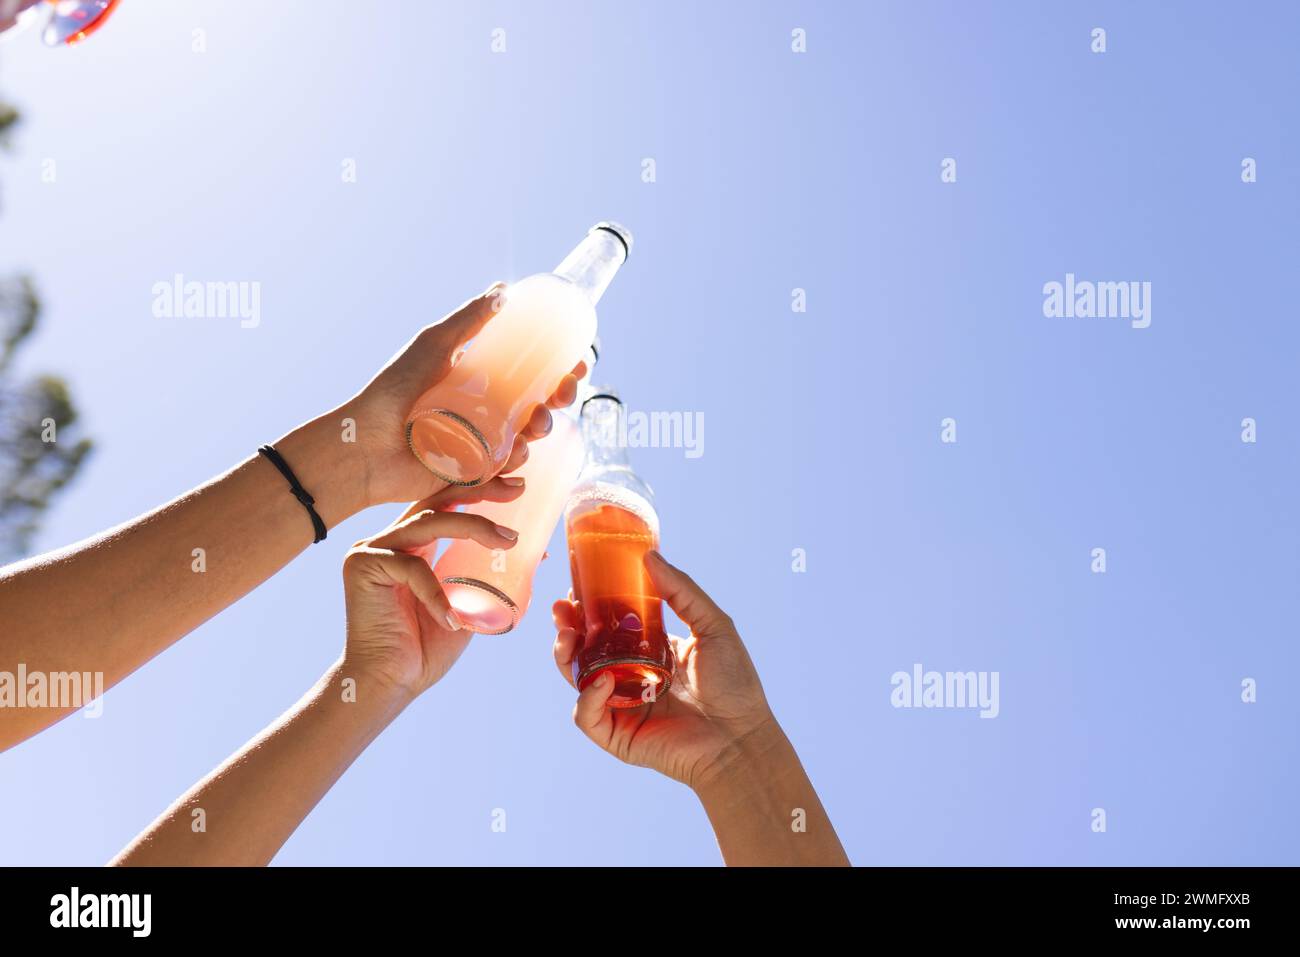 Hands clinking soda bottles against a clear blue sky Stock Photo